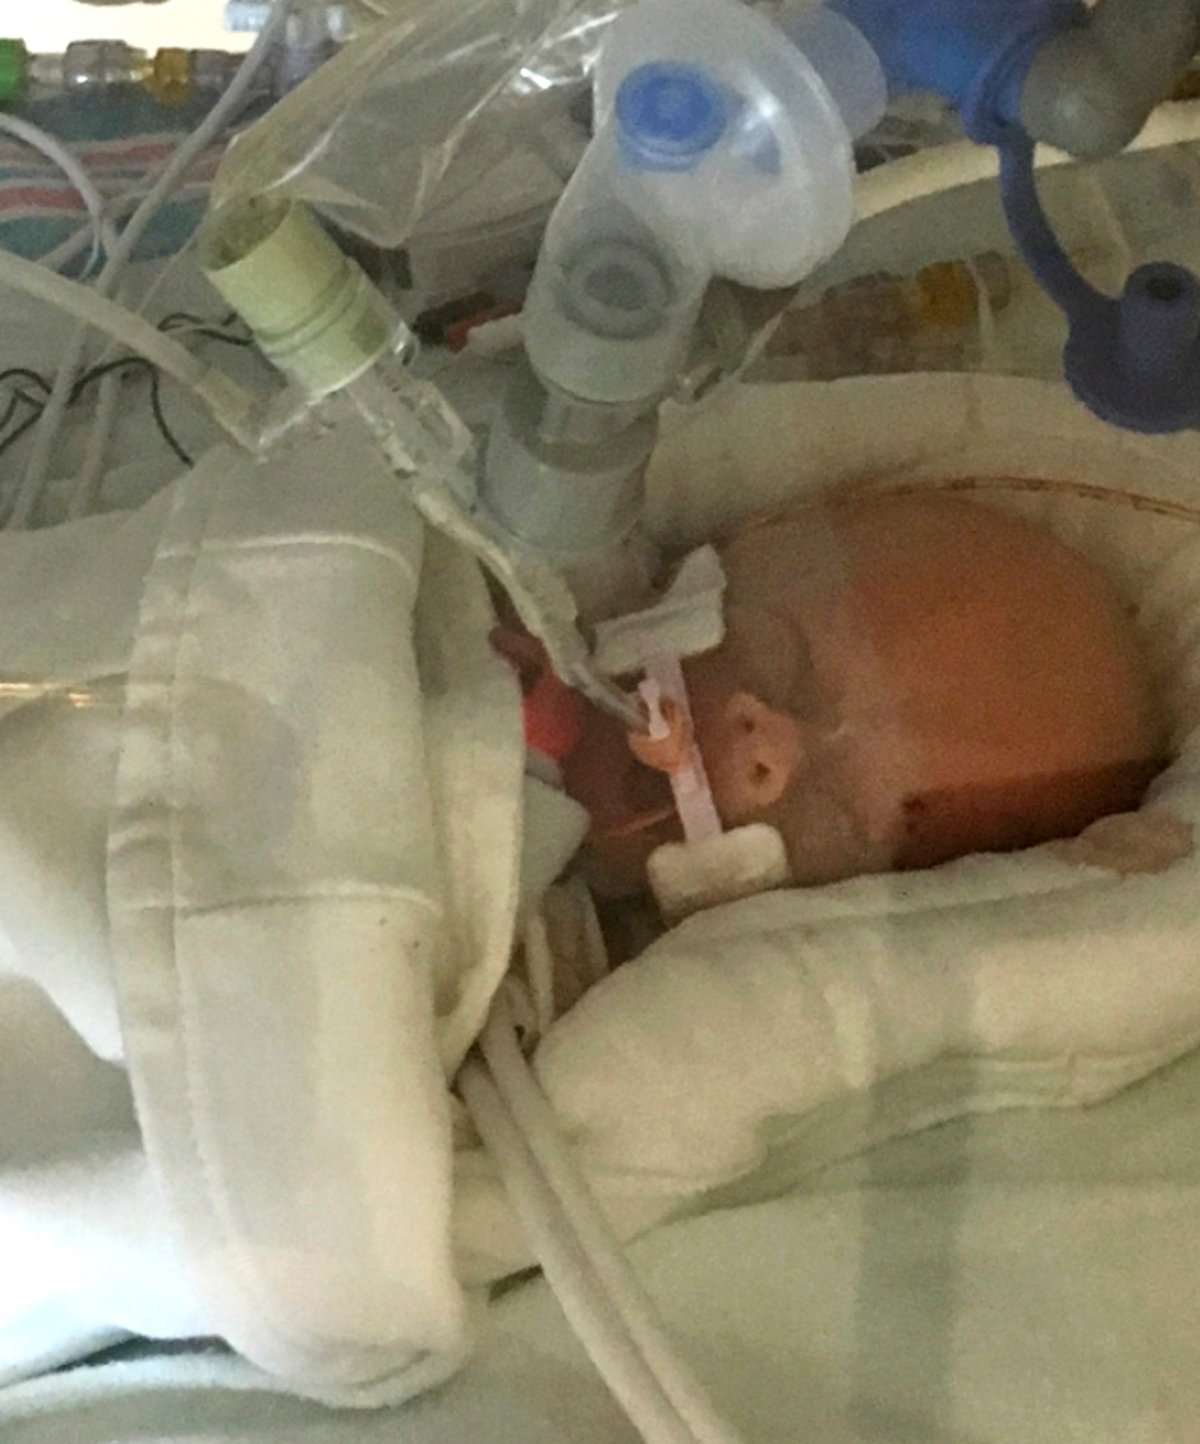 In this Sept. 8, 2017 file photo provided by Sonya Nelson, Life Lynn DeKlyen lies in the Neonatal Intensive Care Unit of the University of Michigan Hospital in Ann Arbor, Mich. 